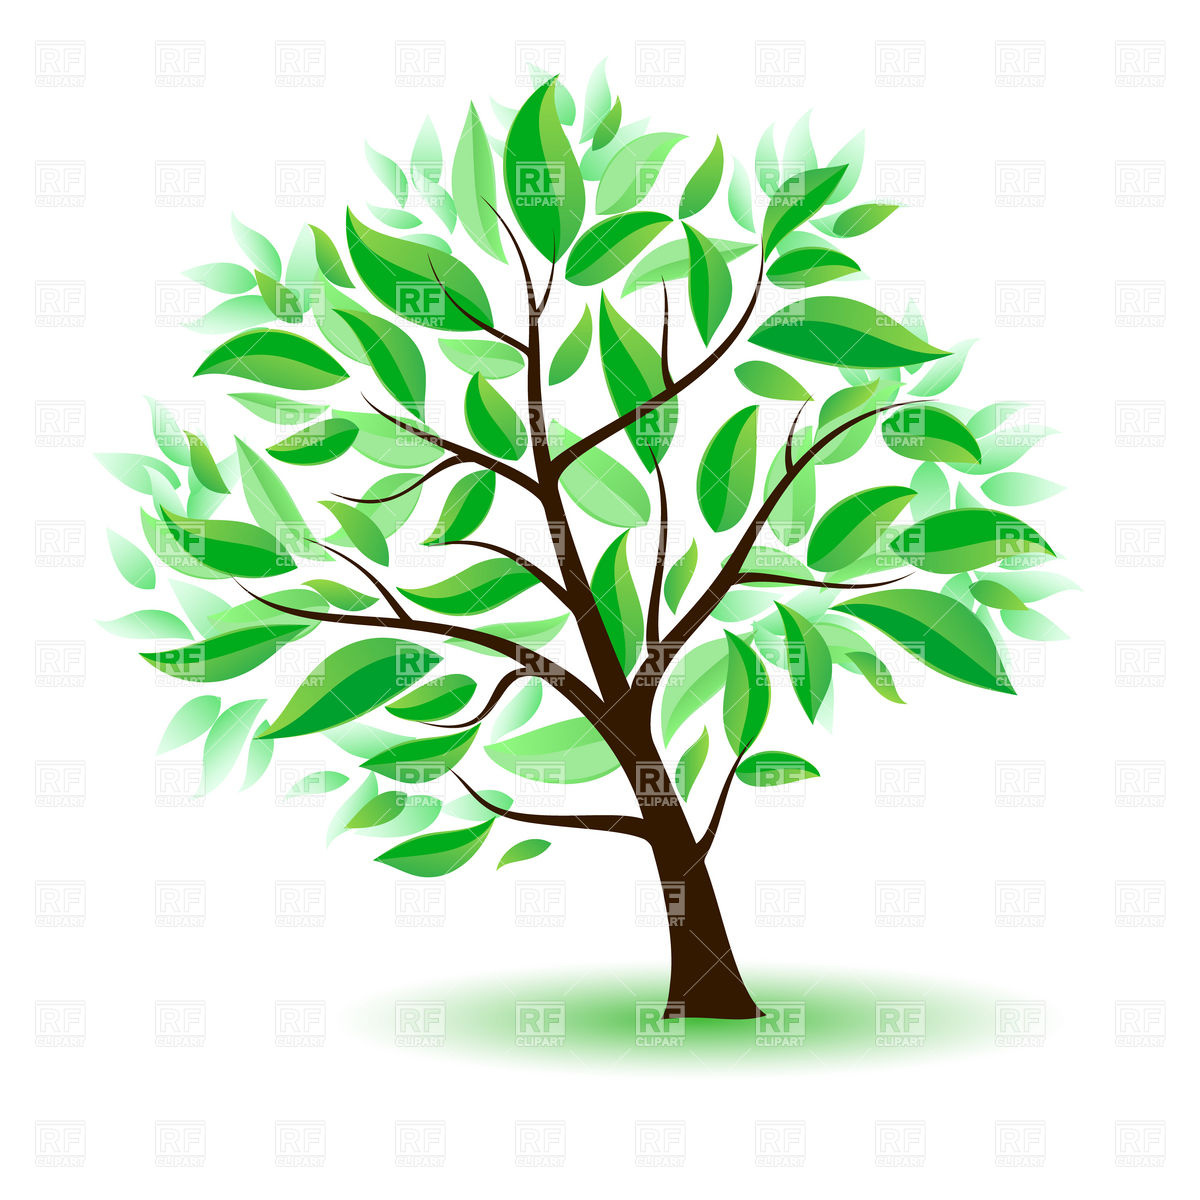 Clipart Tree With Branches And Leaves   Clipart Panda   Free Clipart